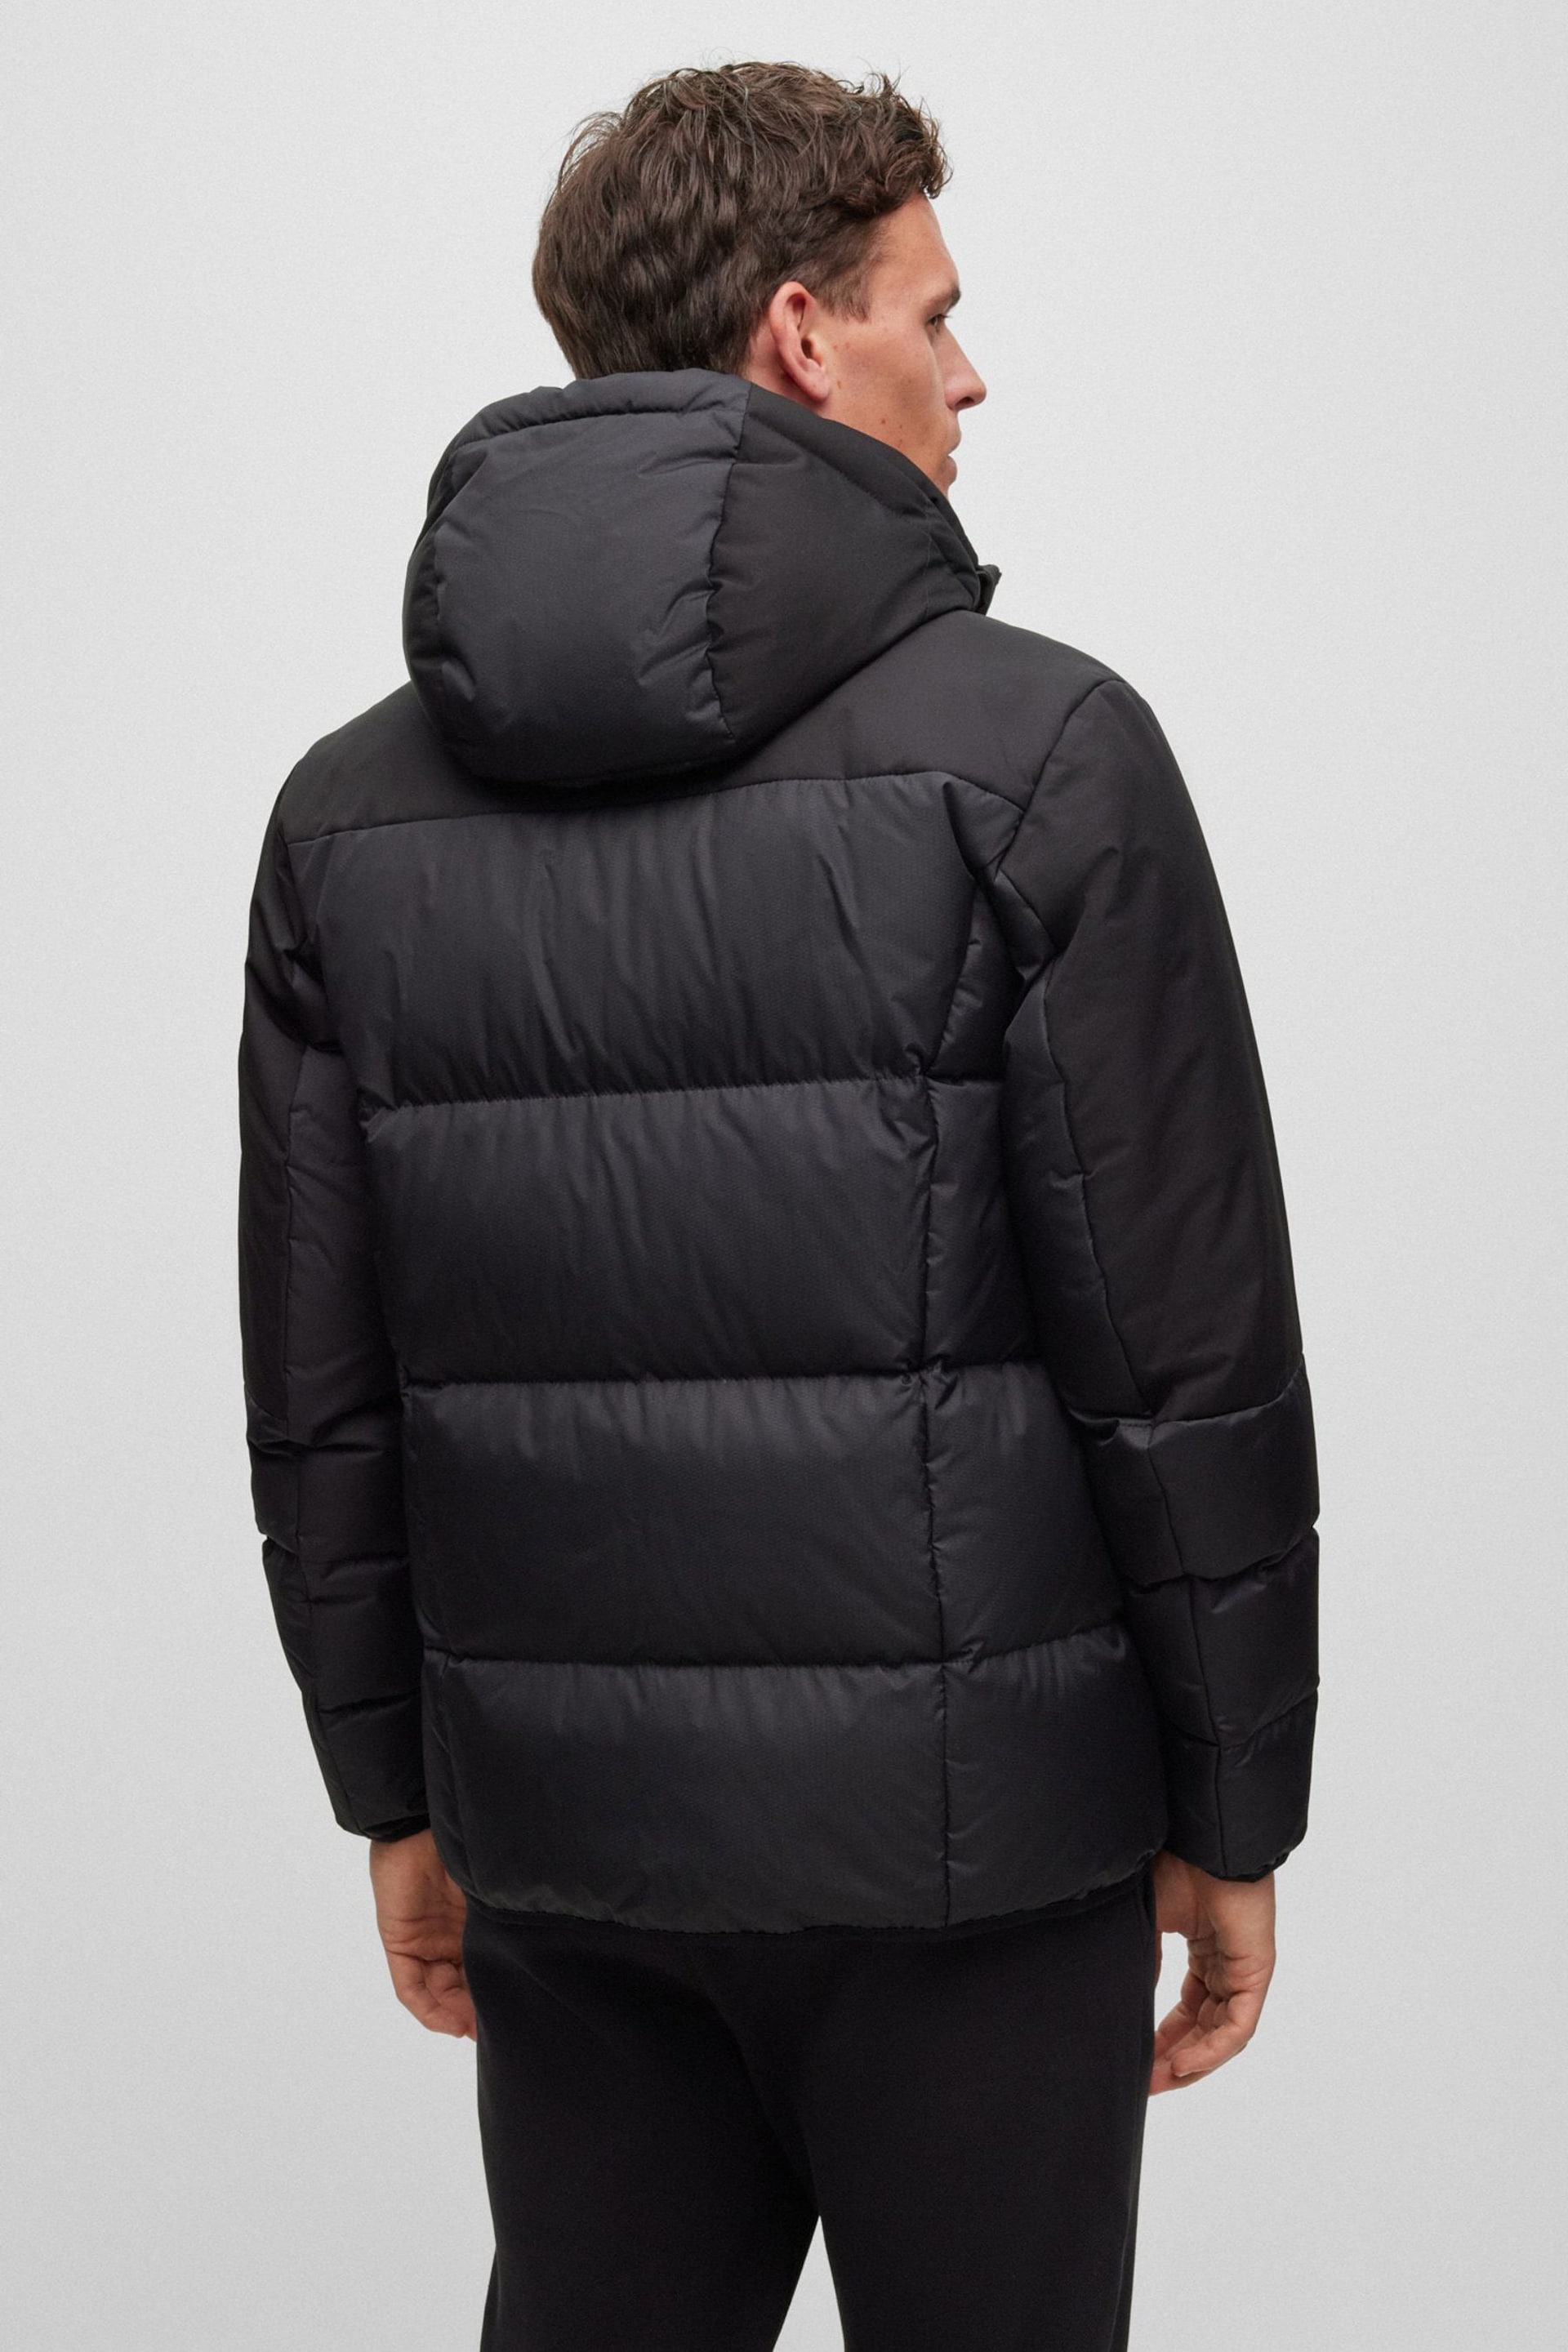 BOSS Black Water Repellent Hooded Down Puffer Jacket - Image 2 of 5